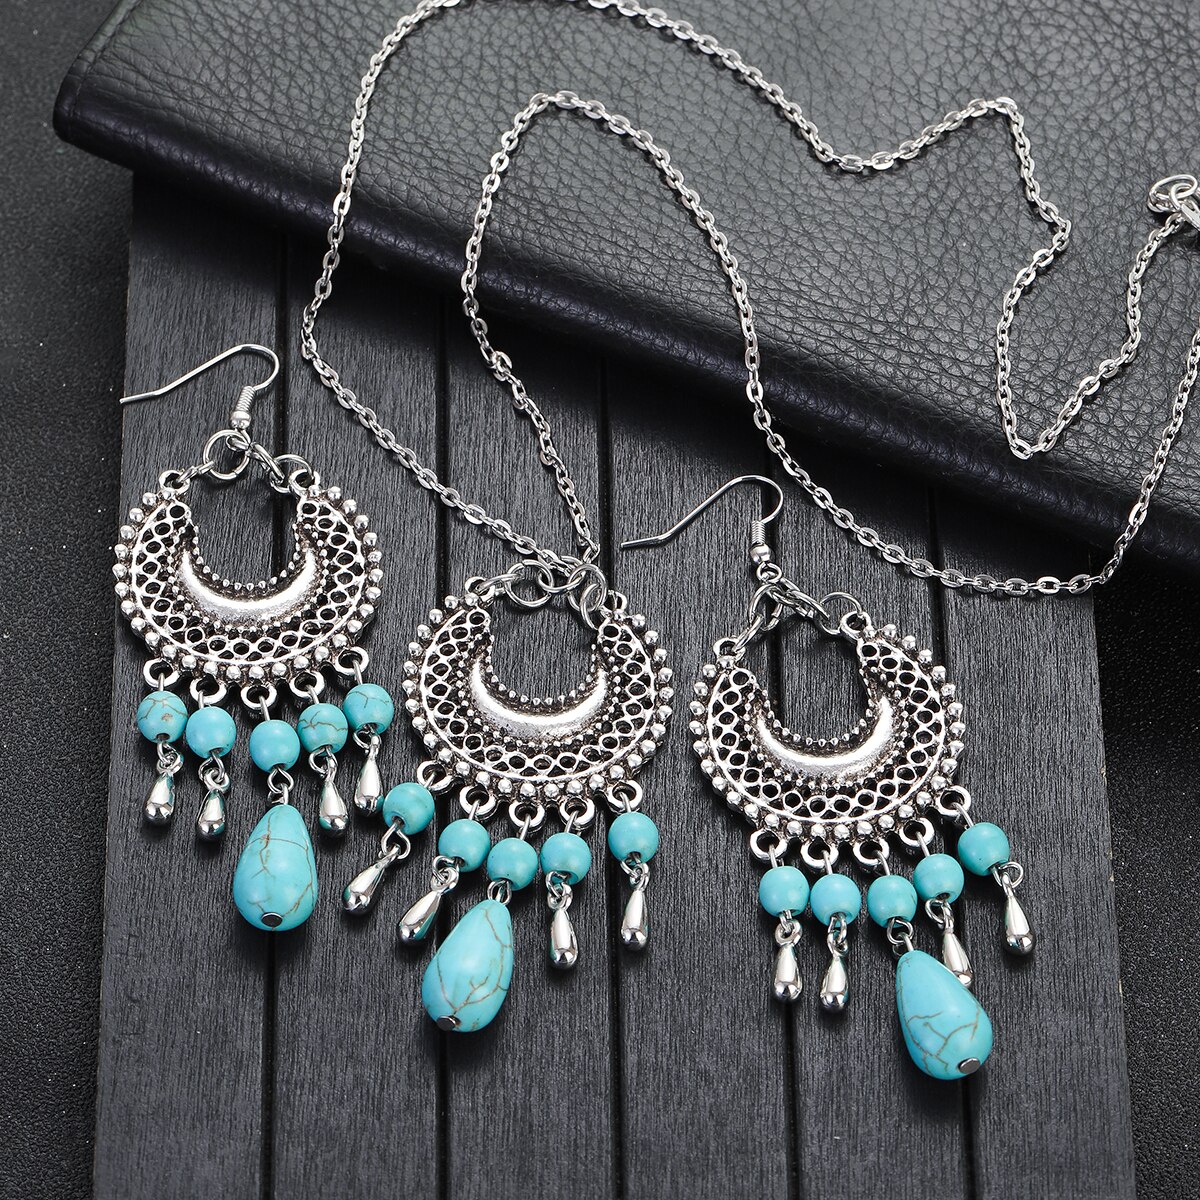 Ethnic-Boho-Blue-Stone-Tassel-Jewelry-Set-Charm-Ladies-Vintage-Jewelry-Silver-Color-Hollow-Flower-Ch-1005005134002231-4